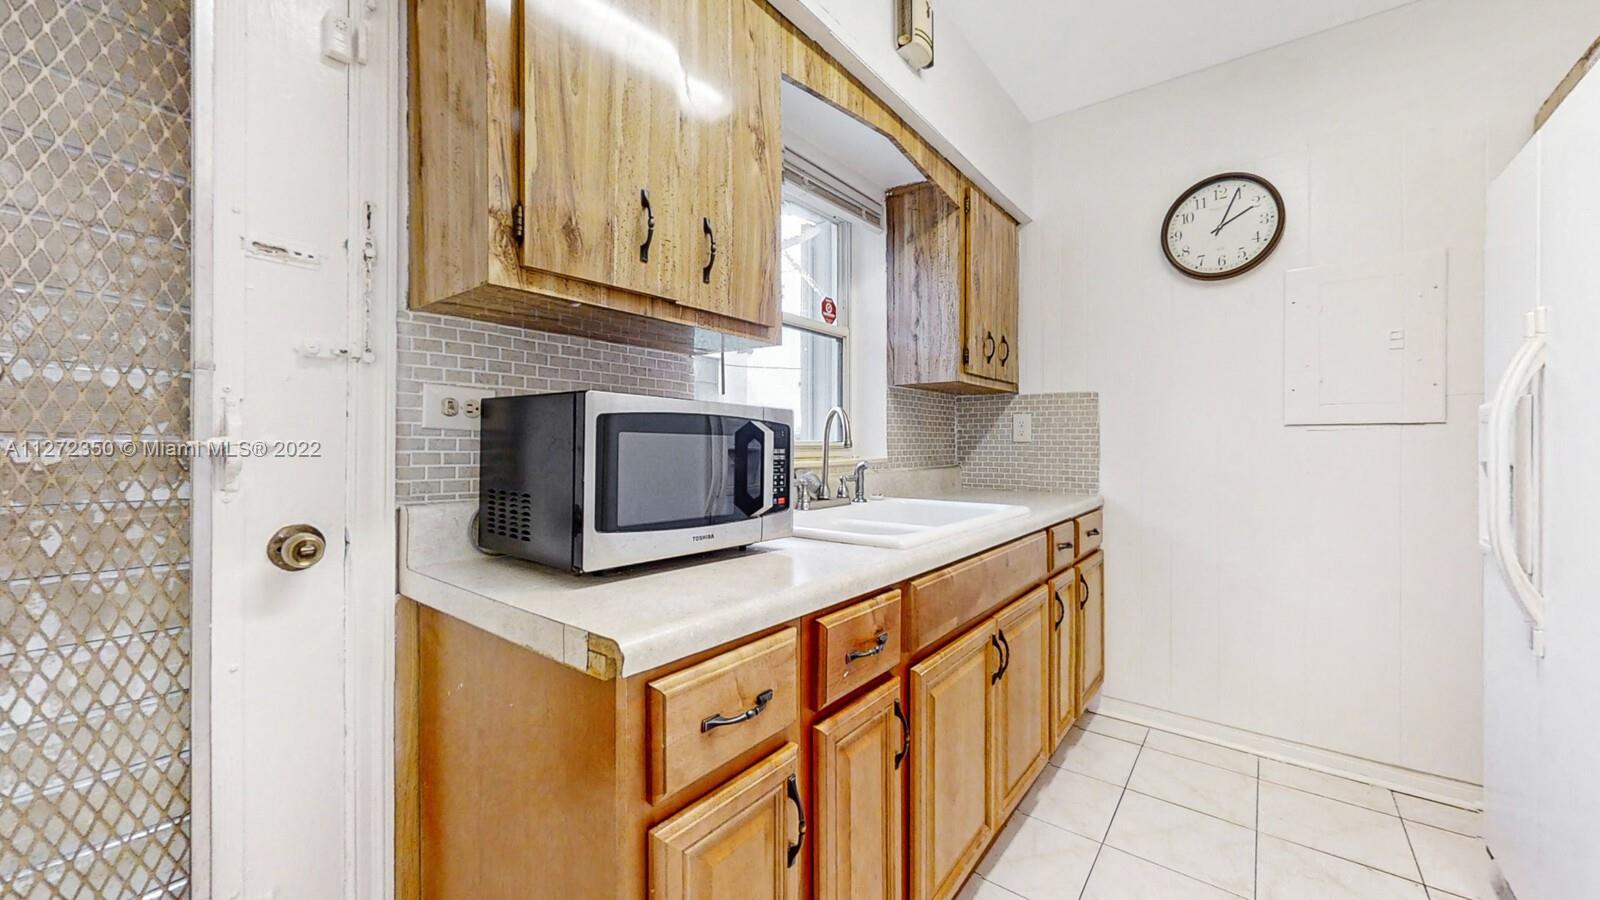 a kitchen with stainless steel appliances granite countertop a stove and a microwave oven